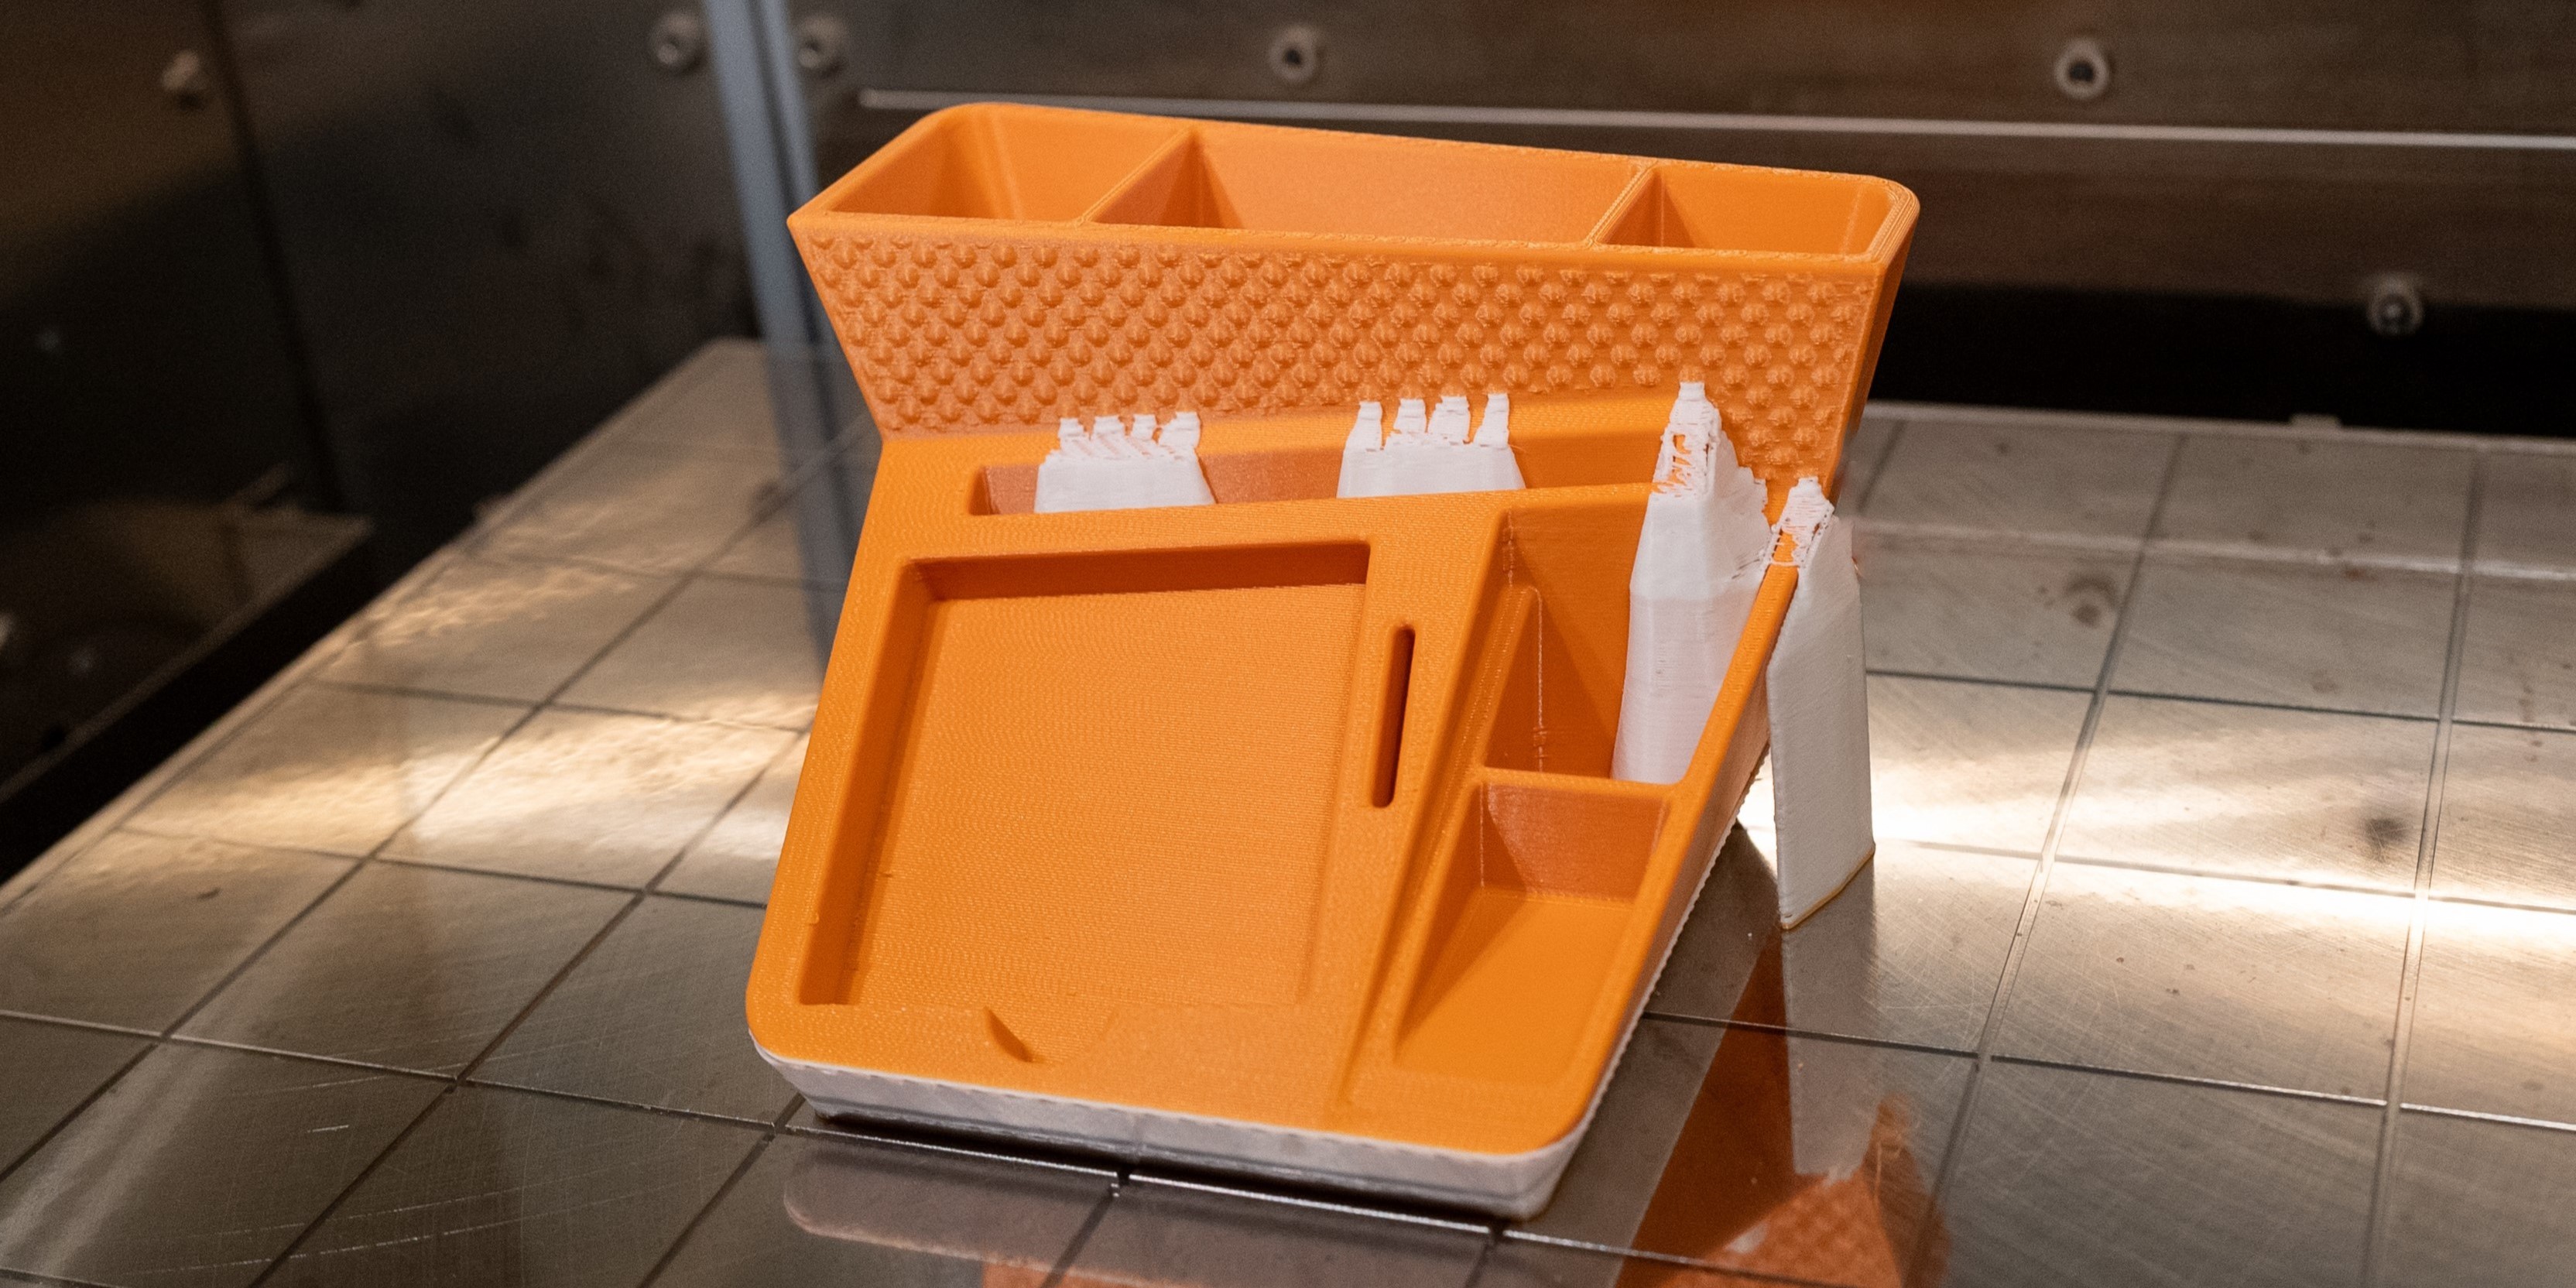 GoEngineer Community 3D printing design content winner, Bring Back the Cool Desk Organizer on the print bed of the Stratasys FDM Fortus 450mc